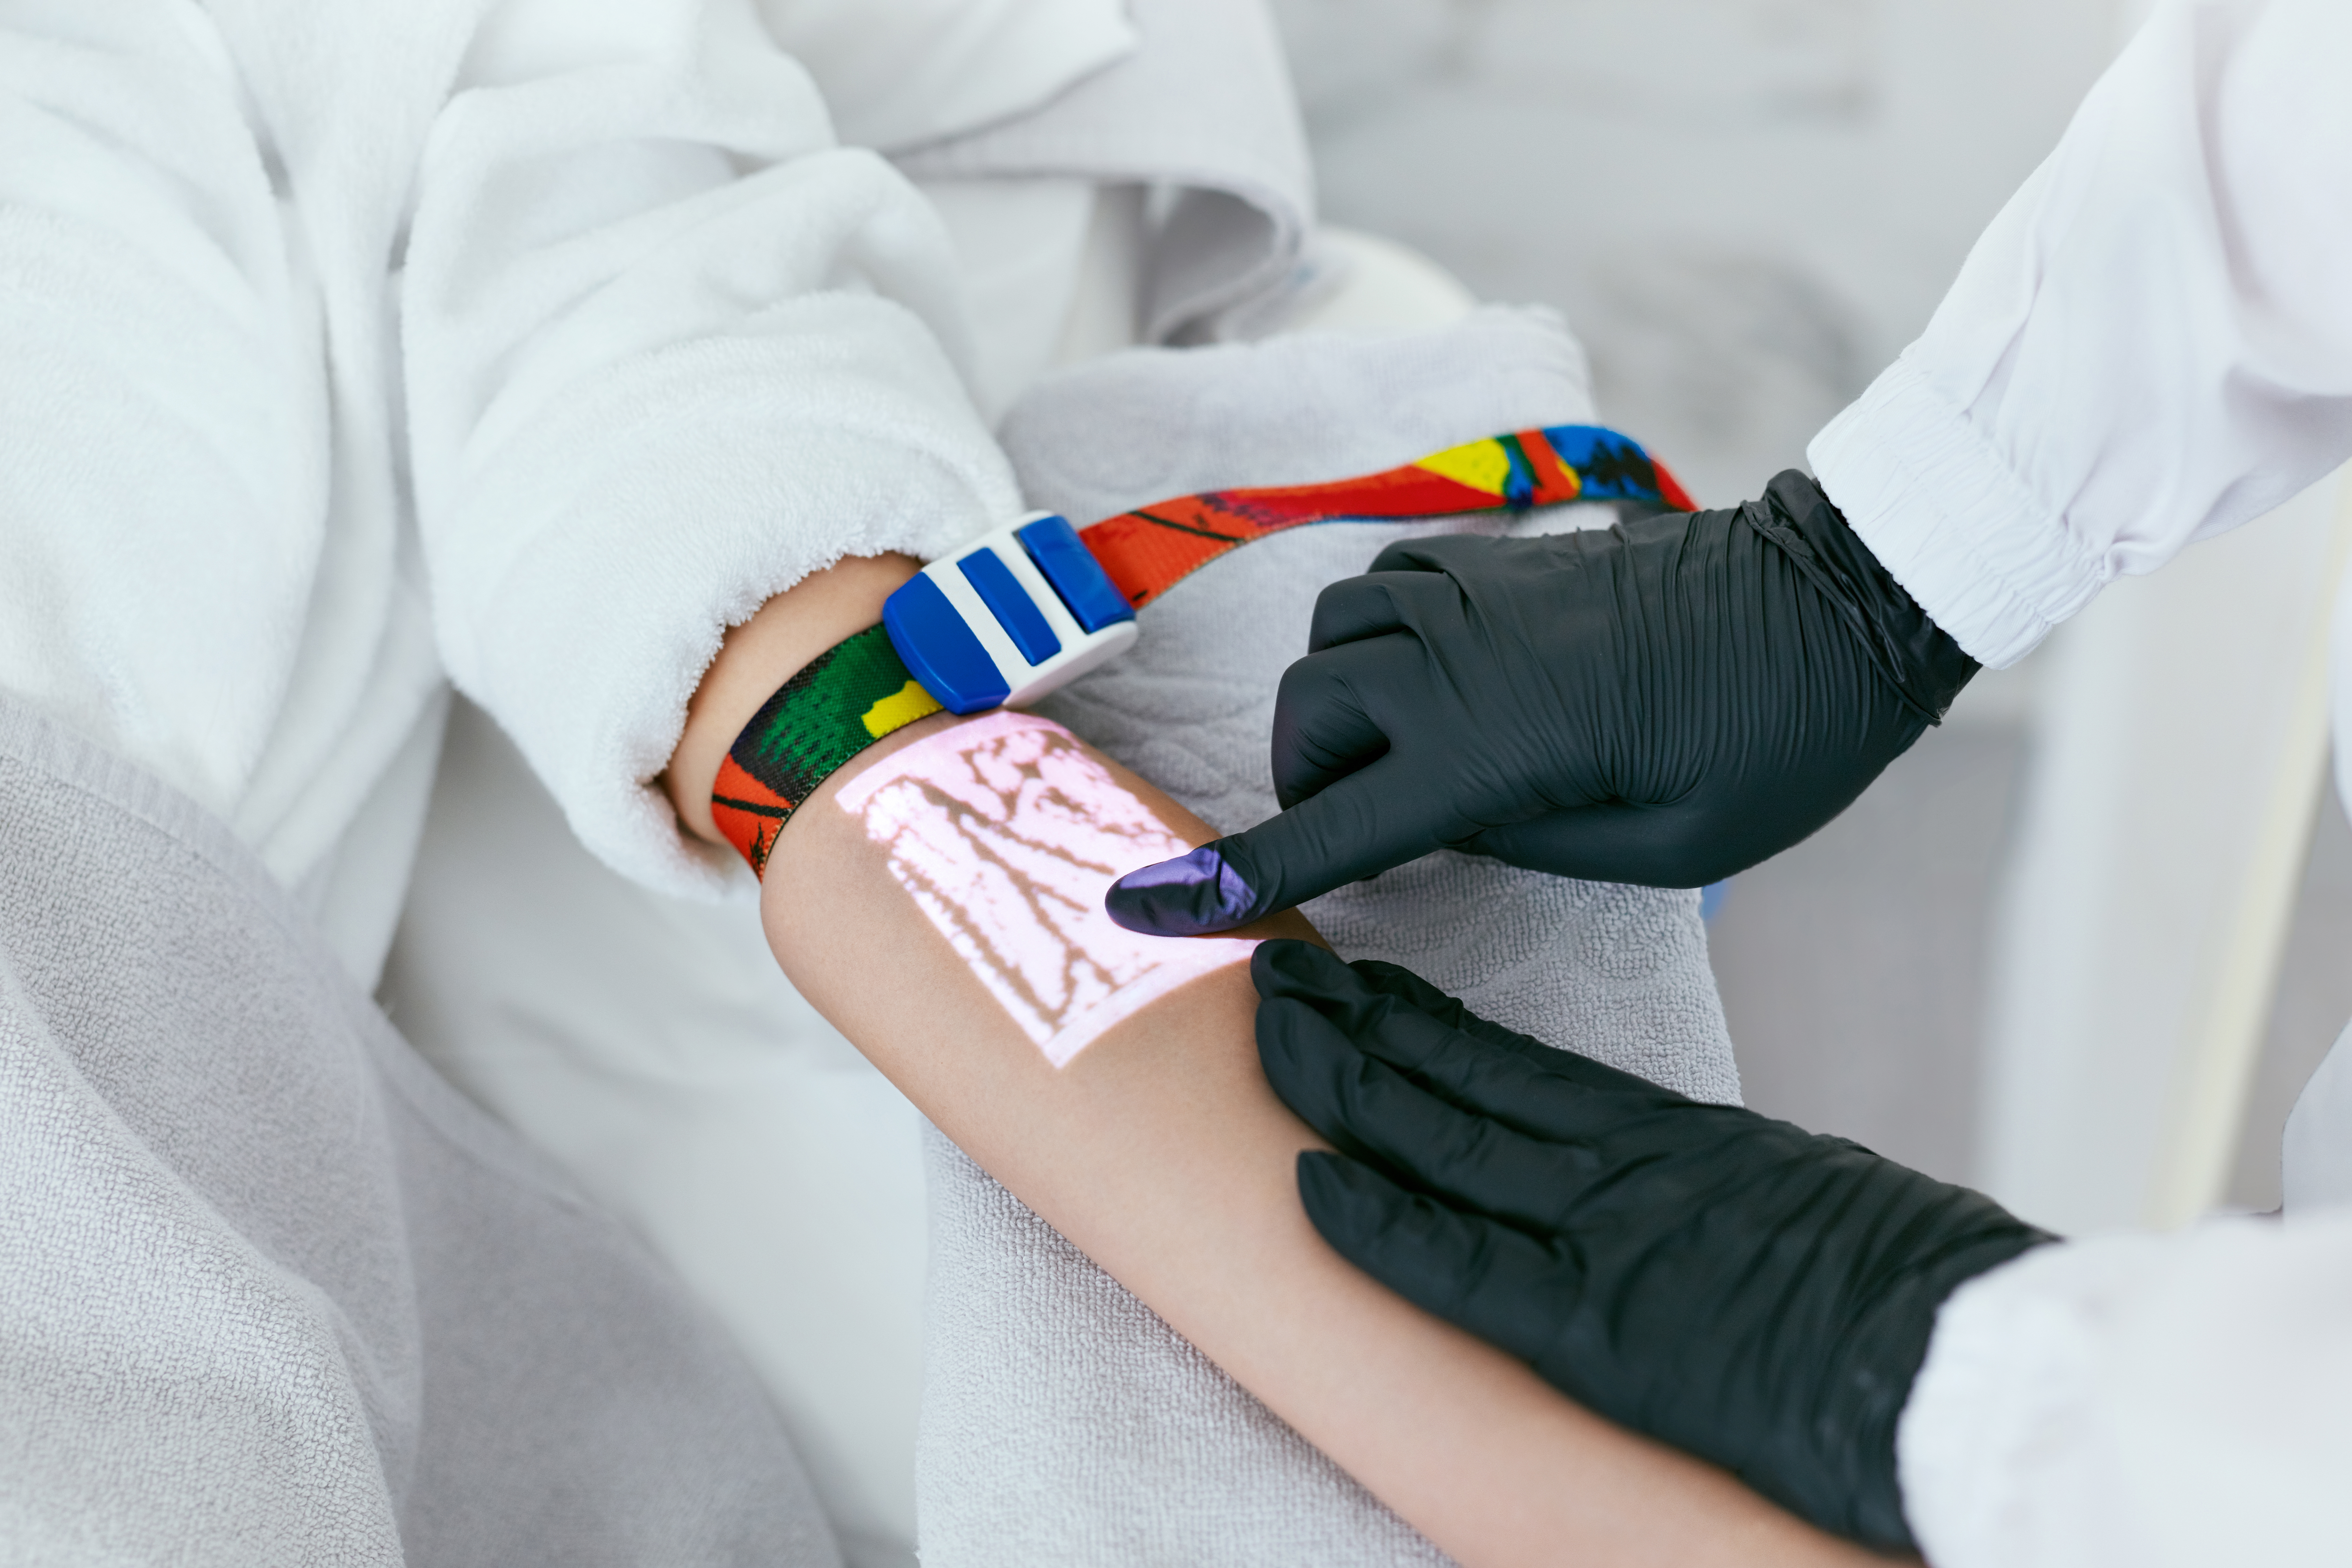 A doctor vein mapping a young woman's forearm as part of her treatment for poor circulation in hands and feet.